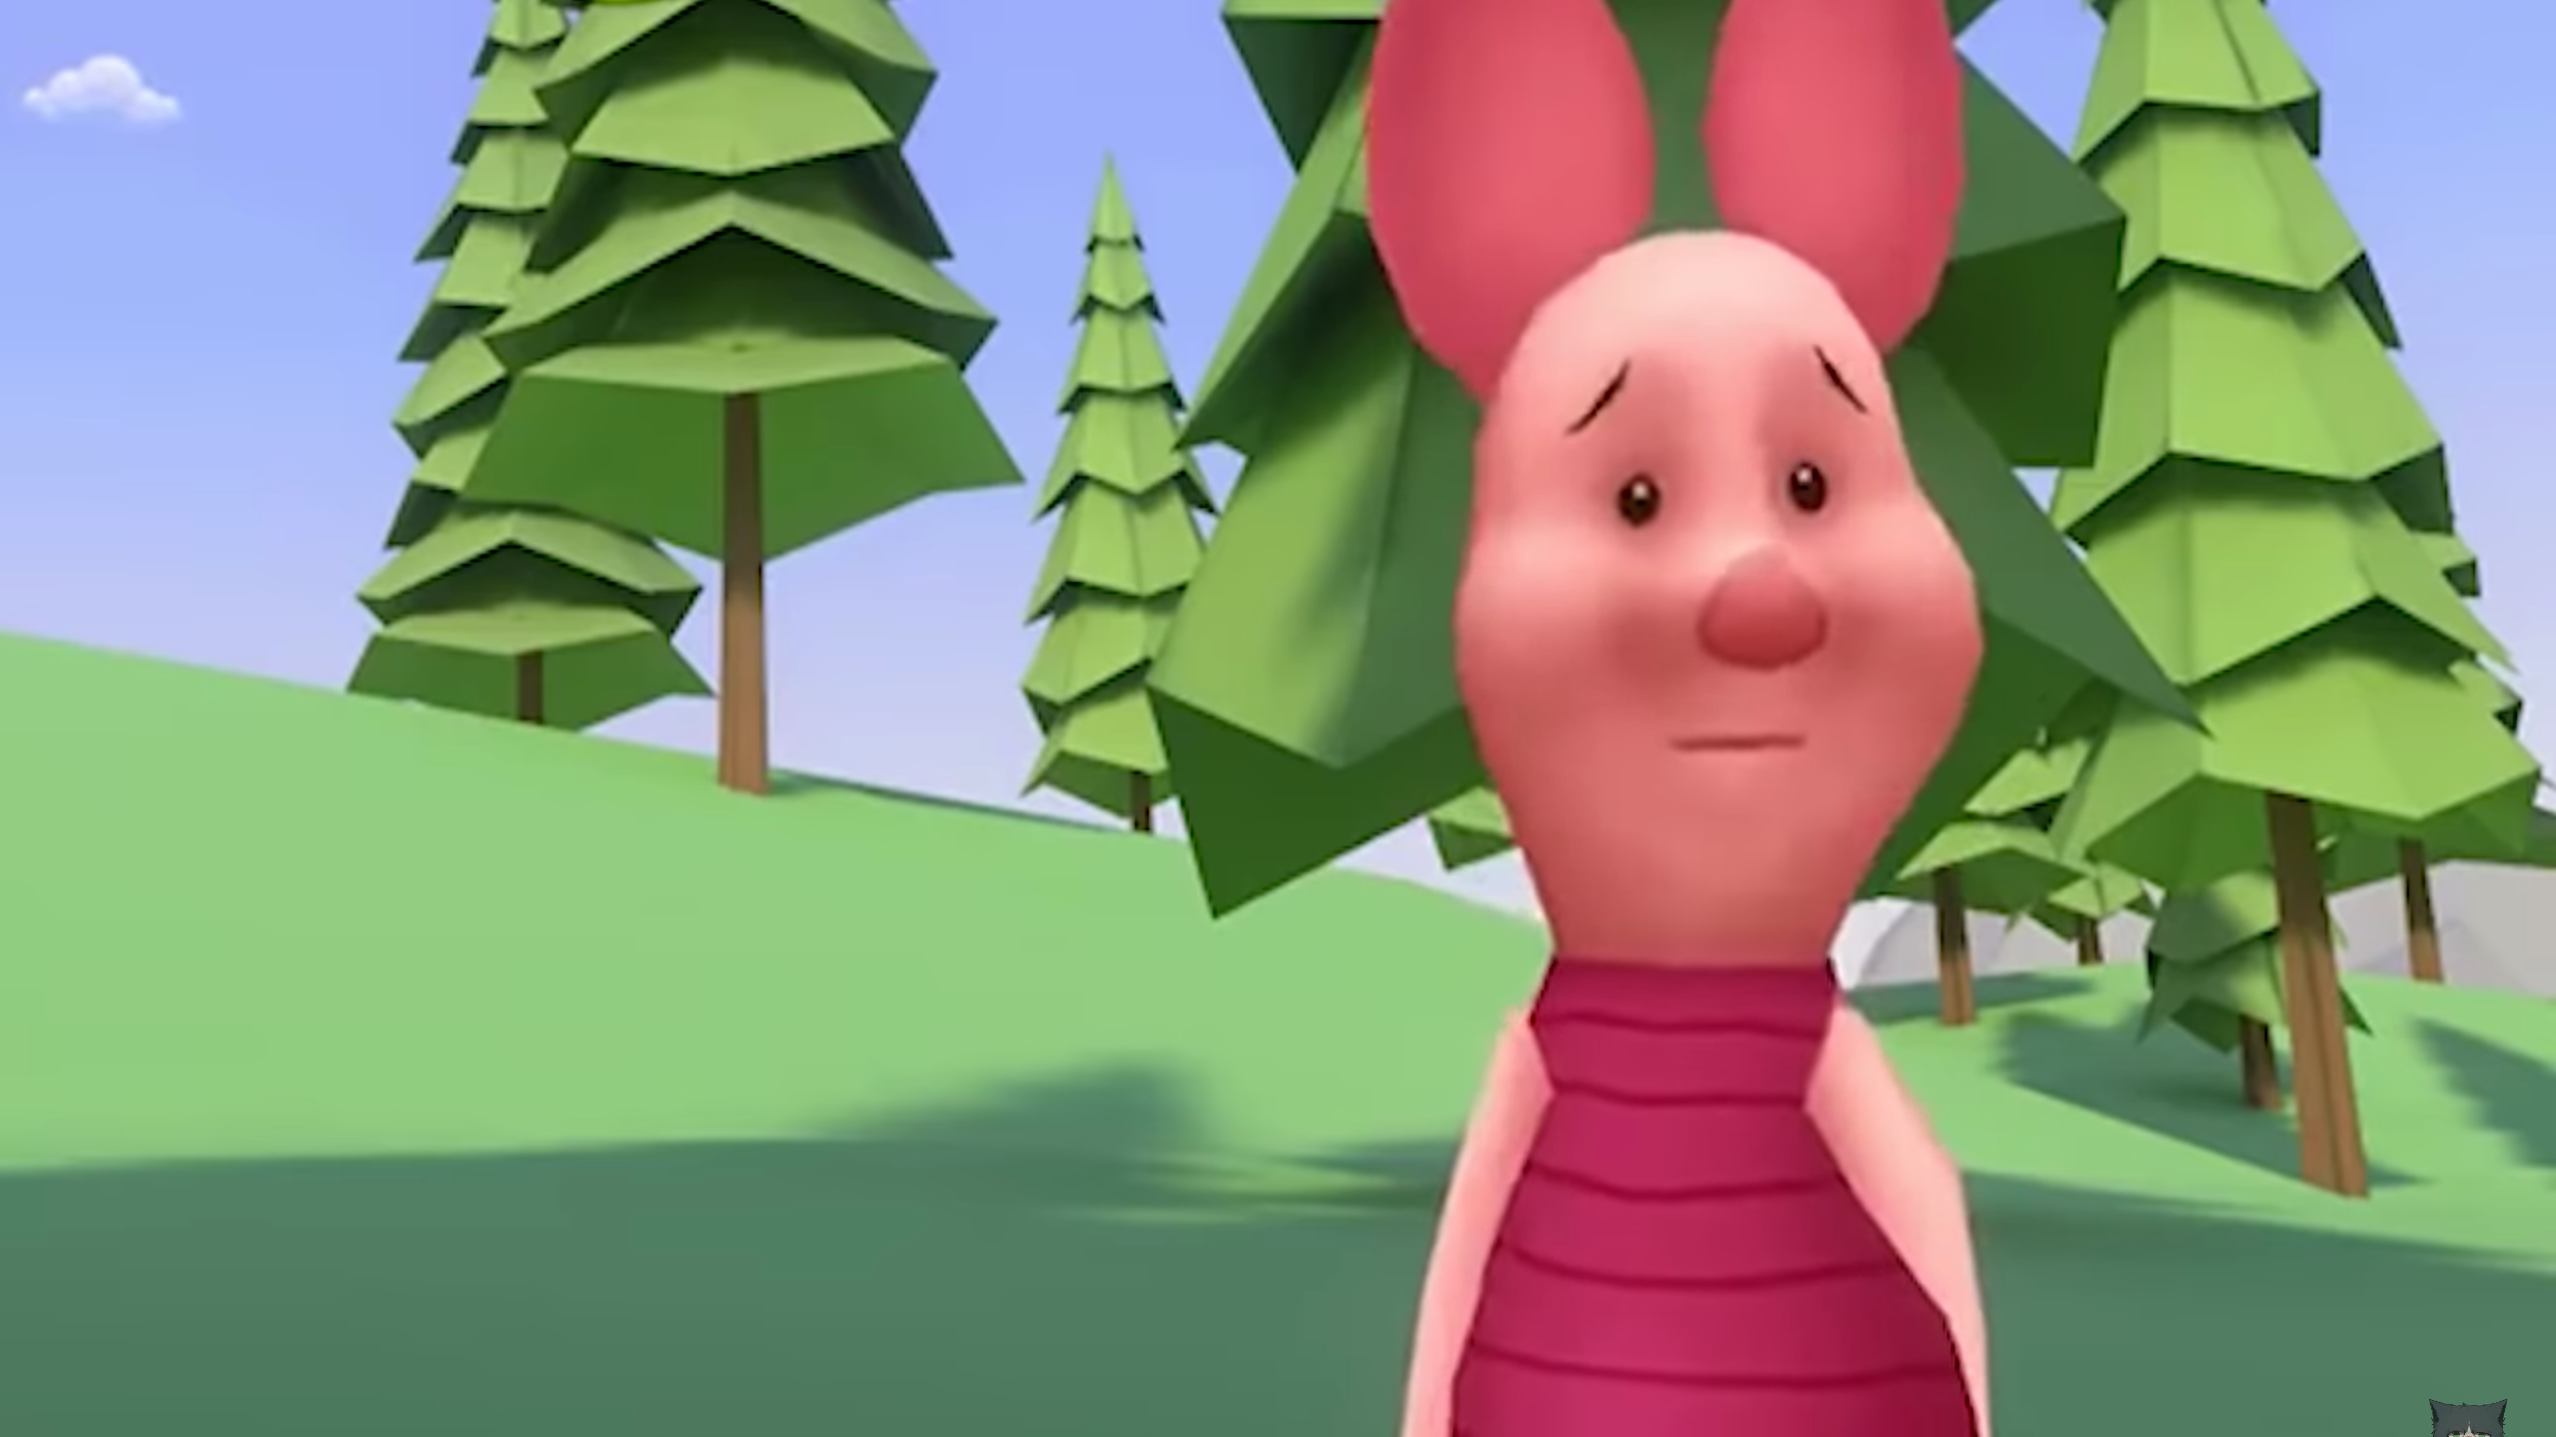 A Youtuber Finds Wholesome Heartbreaking Stories Behind Silly Vrchat Avatars